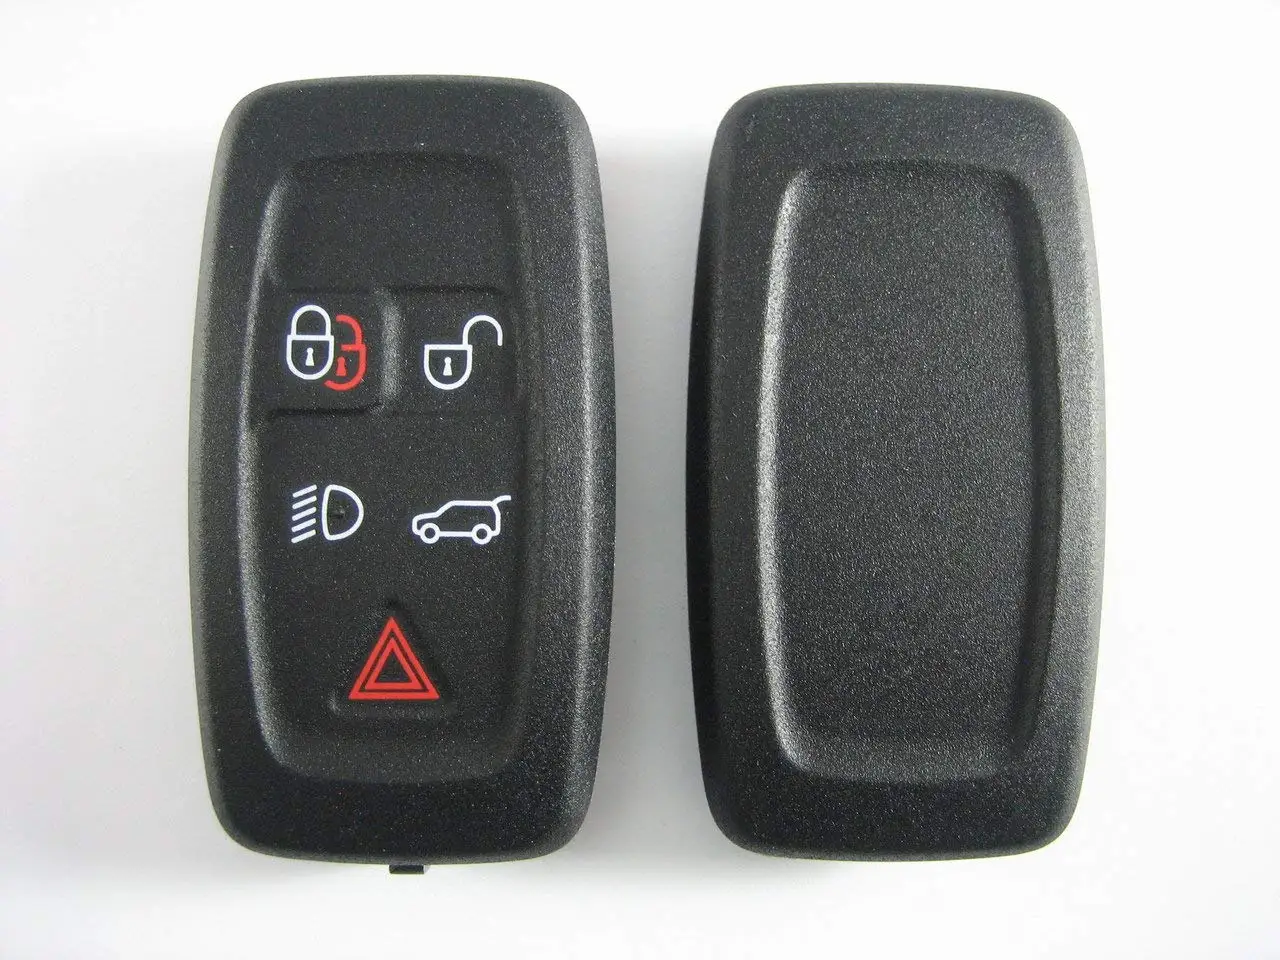 Range Rover Key Battery  - Sign Up If You Have A Question, Answer.